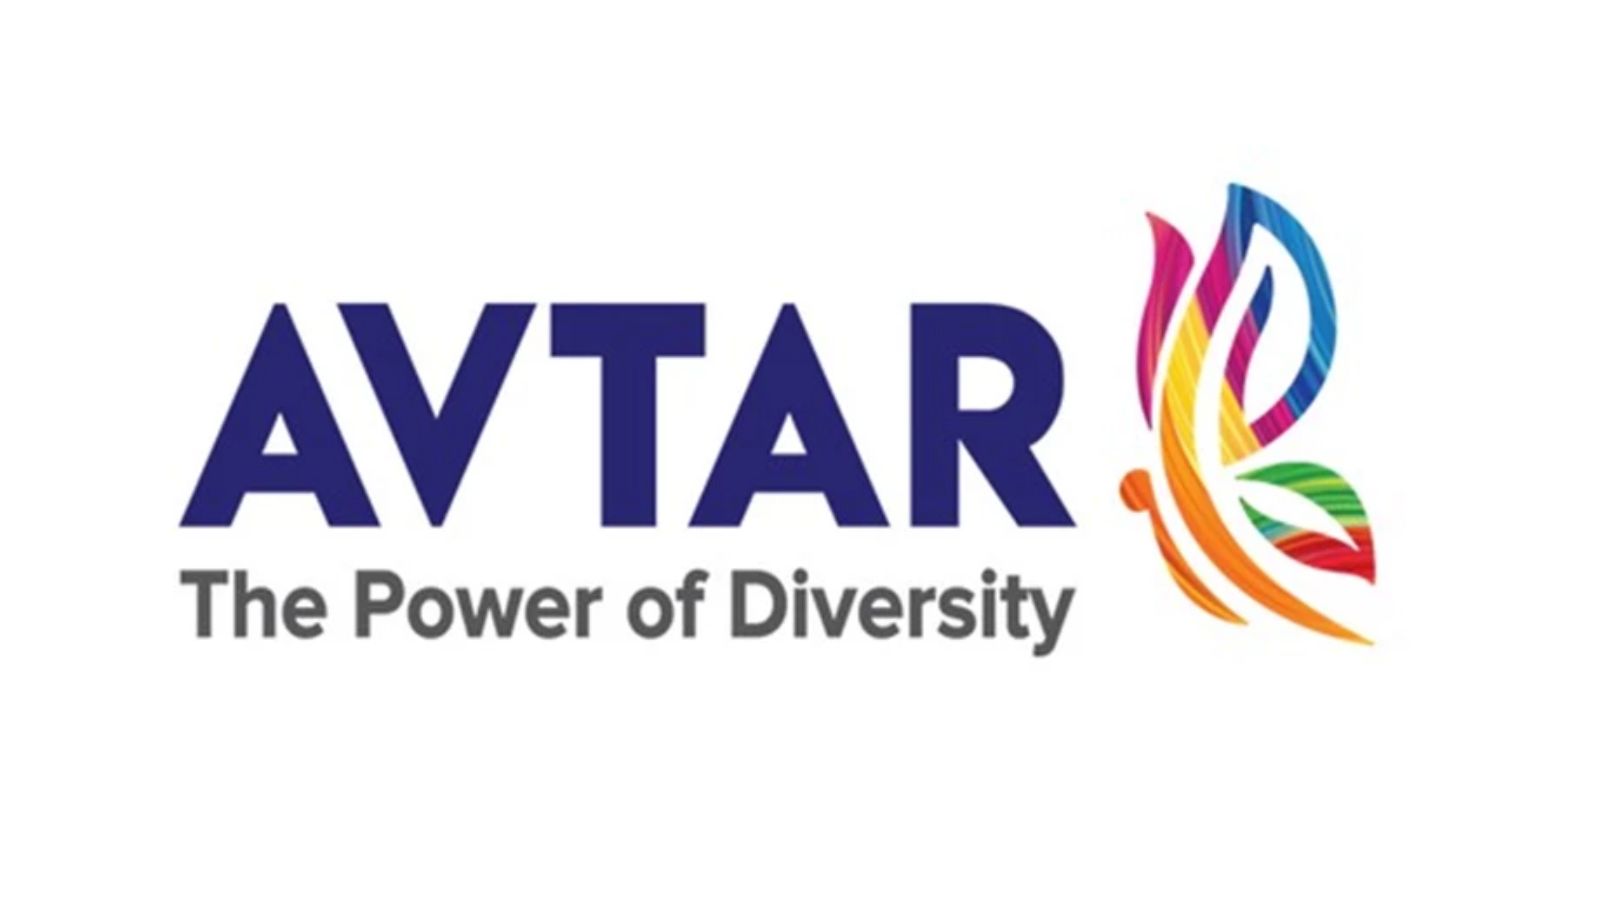 Avtar Announces its 3rd Edition of ‘The Power of I’, Virtual DEI Conference centred at #BuildingConnectedness